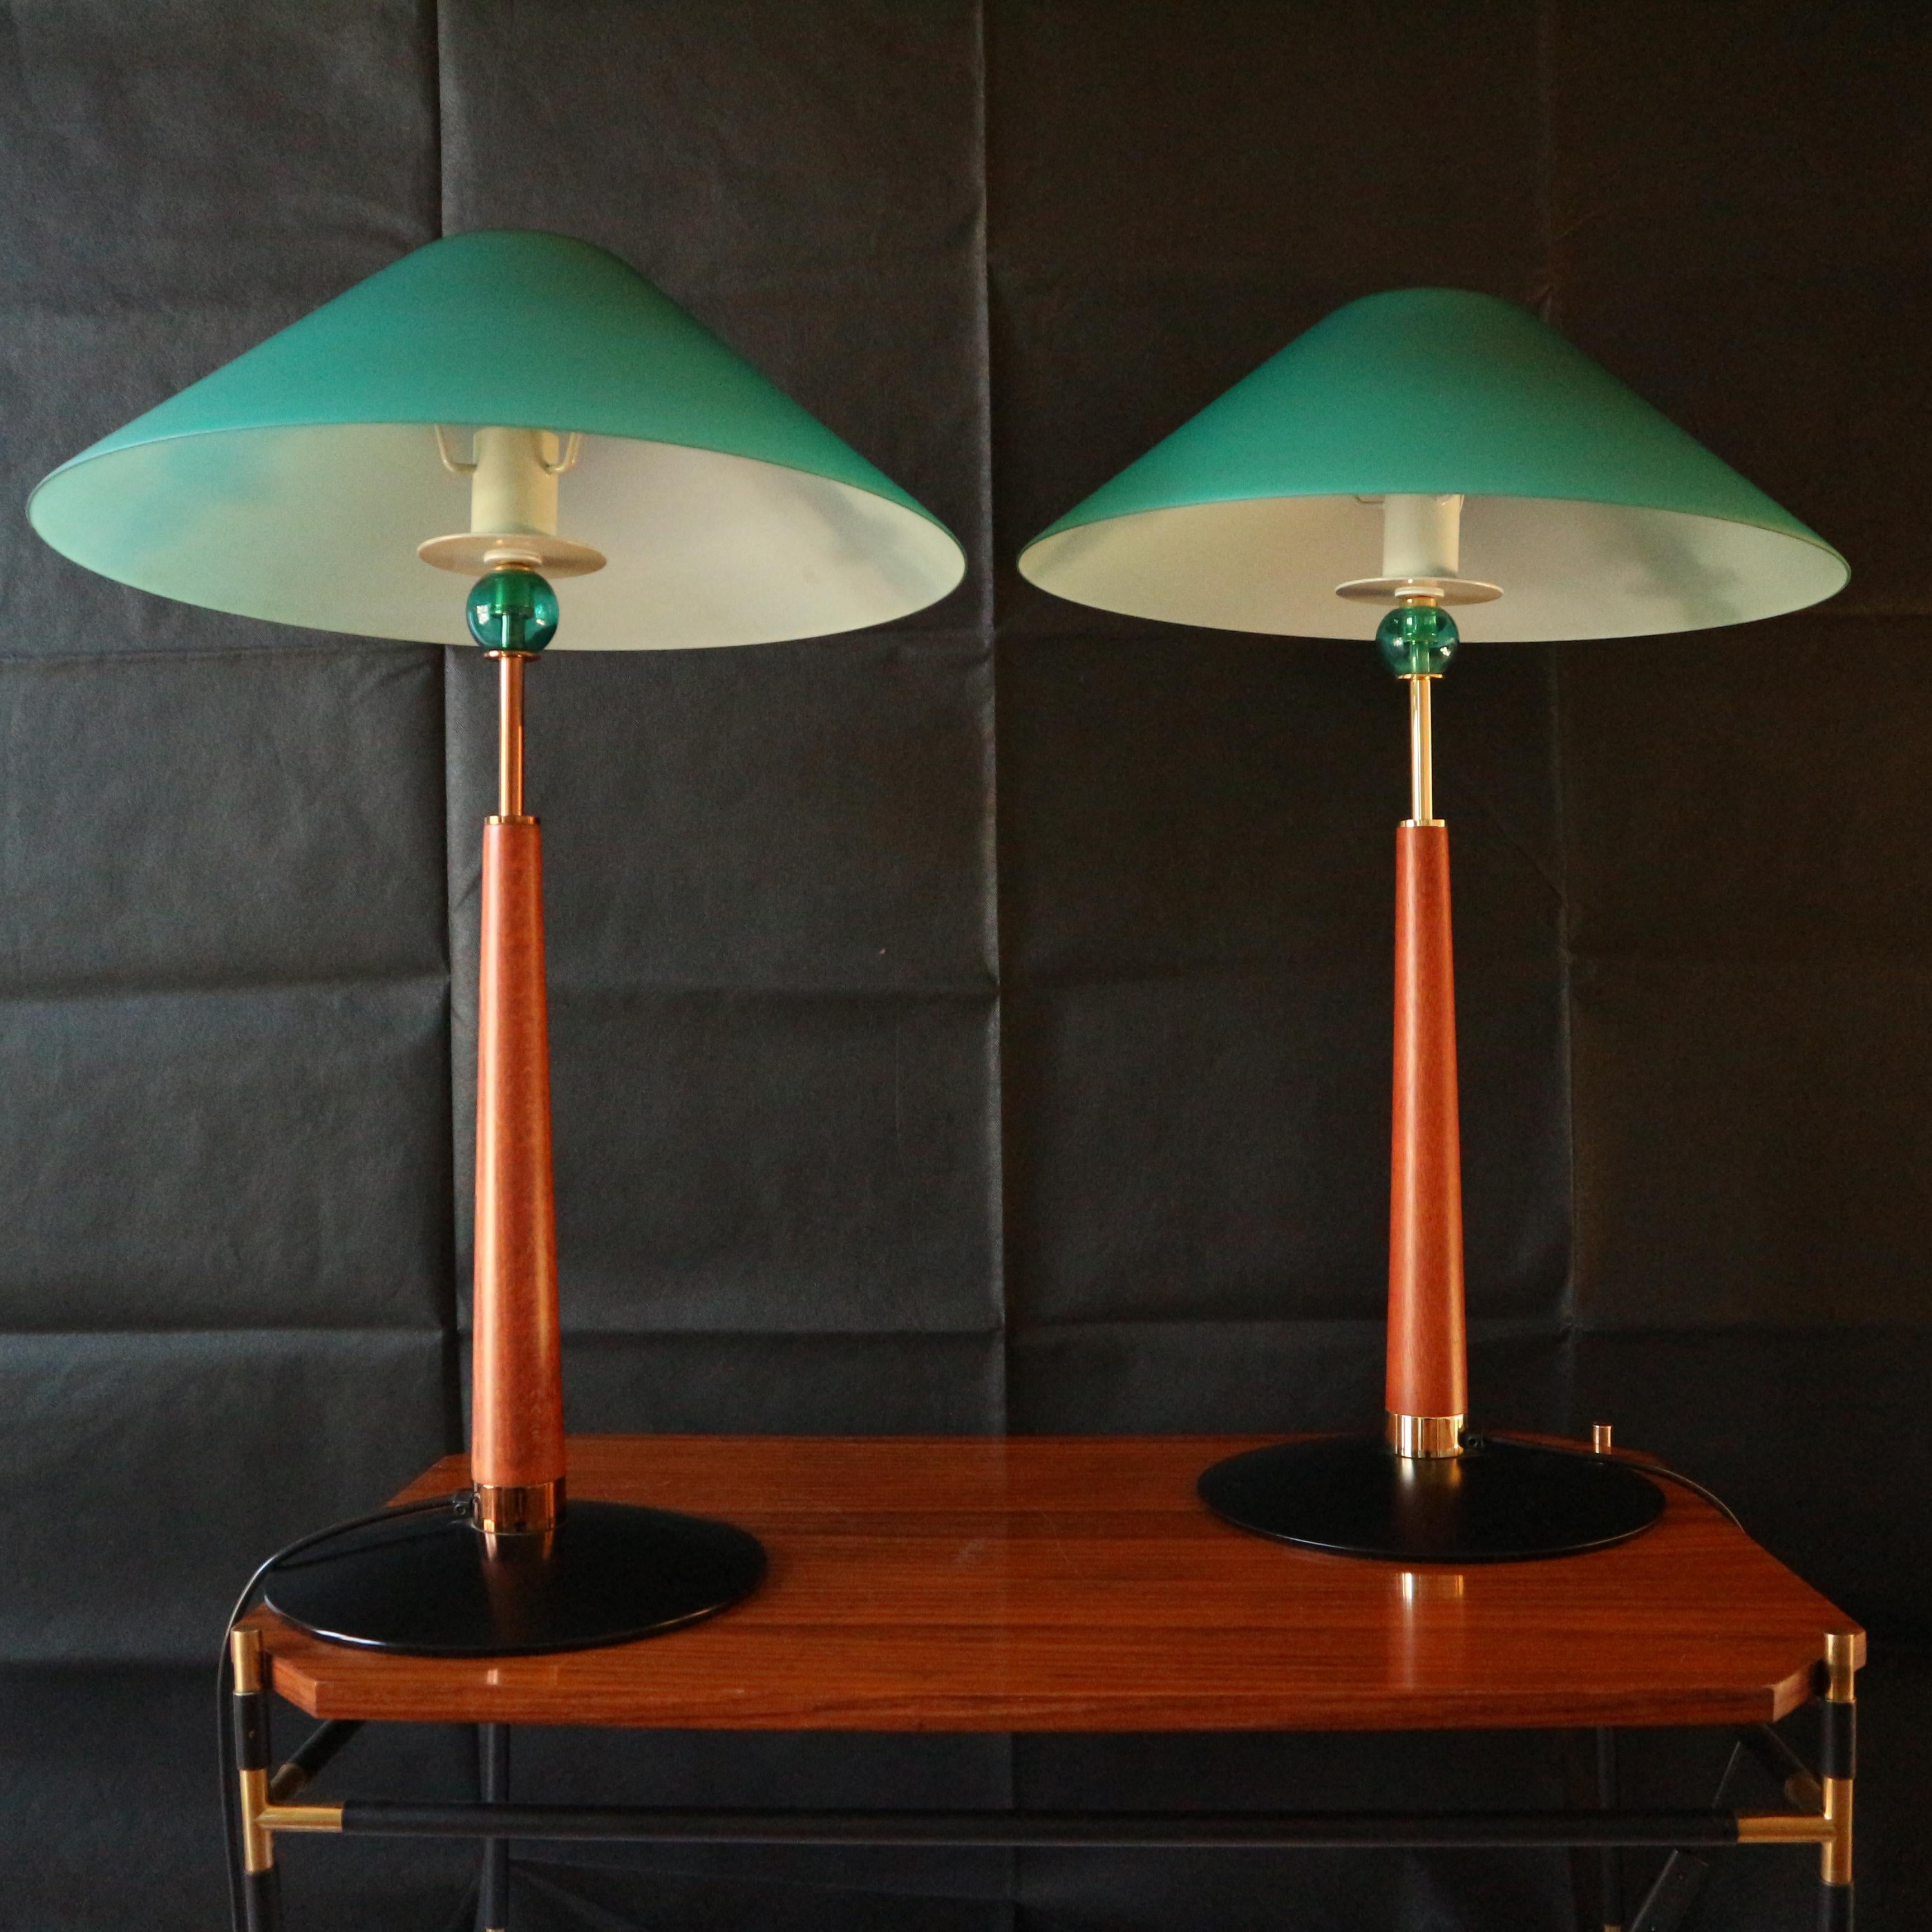 The table lamps are made of metal, wood, 